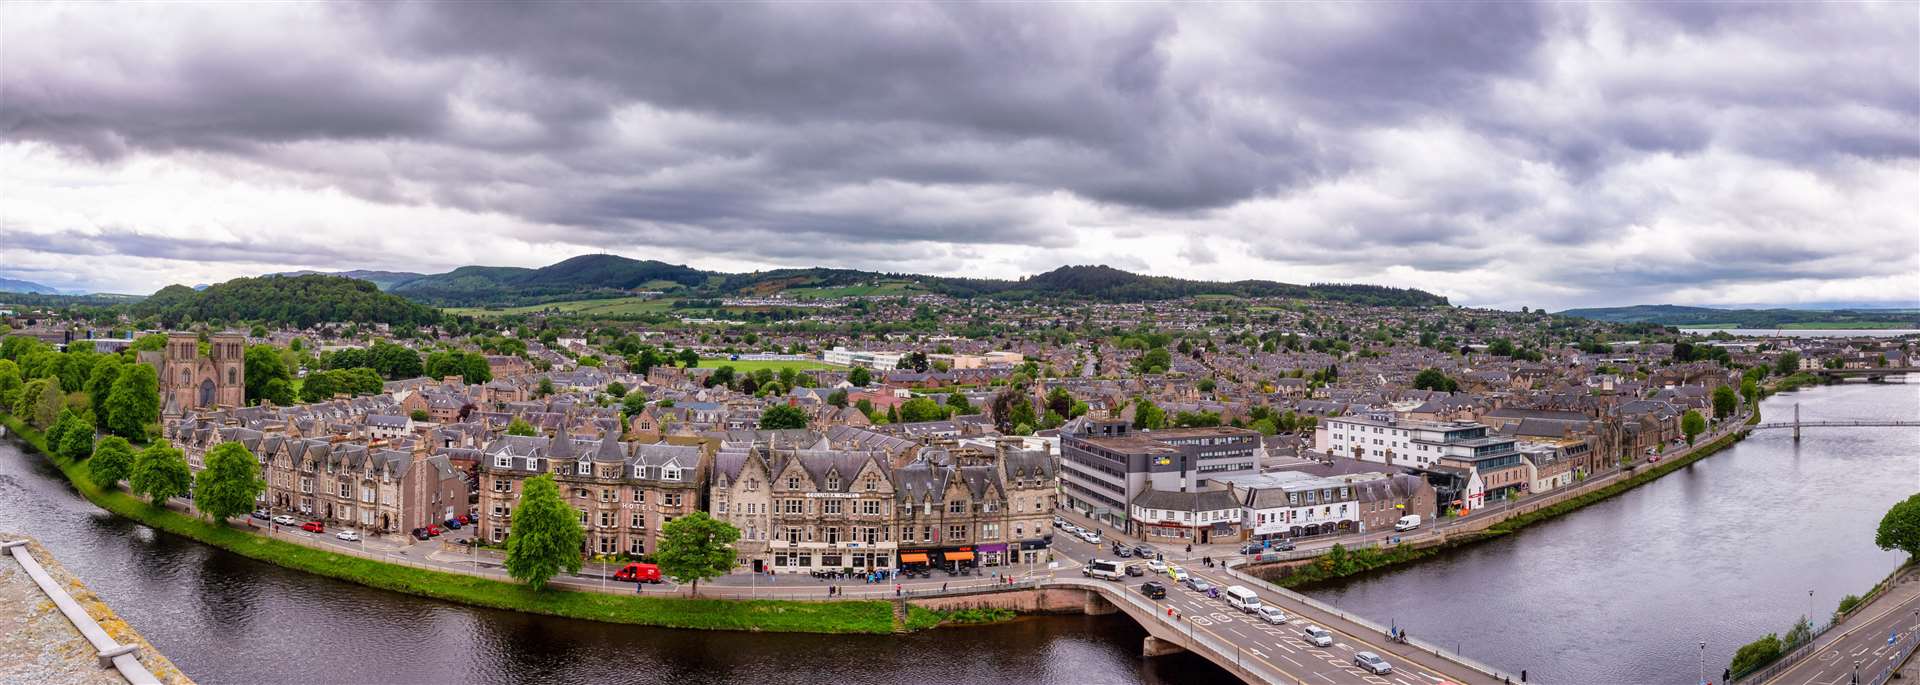 Inverness has seen an explosion in the number of properties available for short term let through Airbnb over the past five years according to new figures.